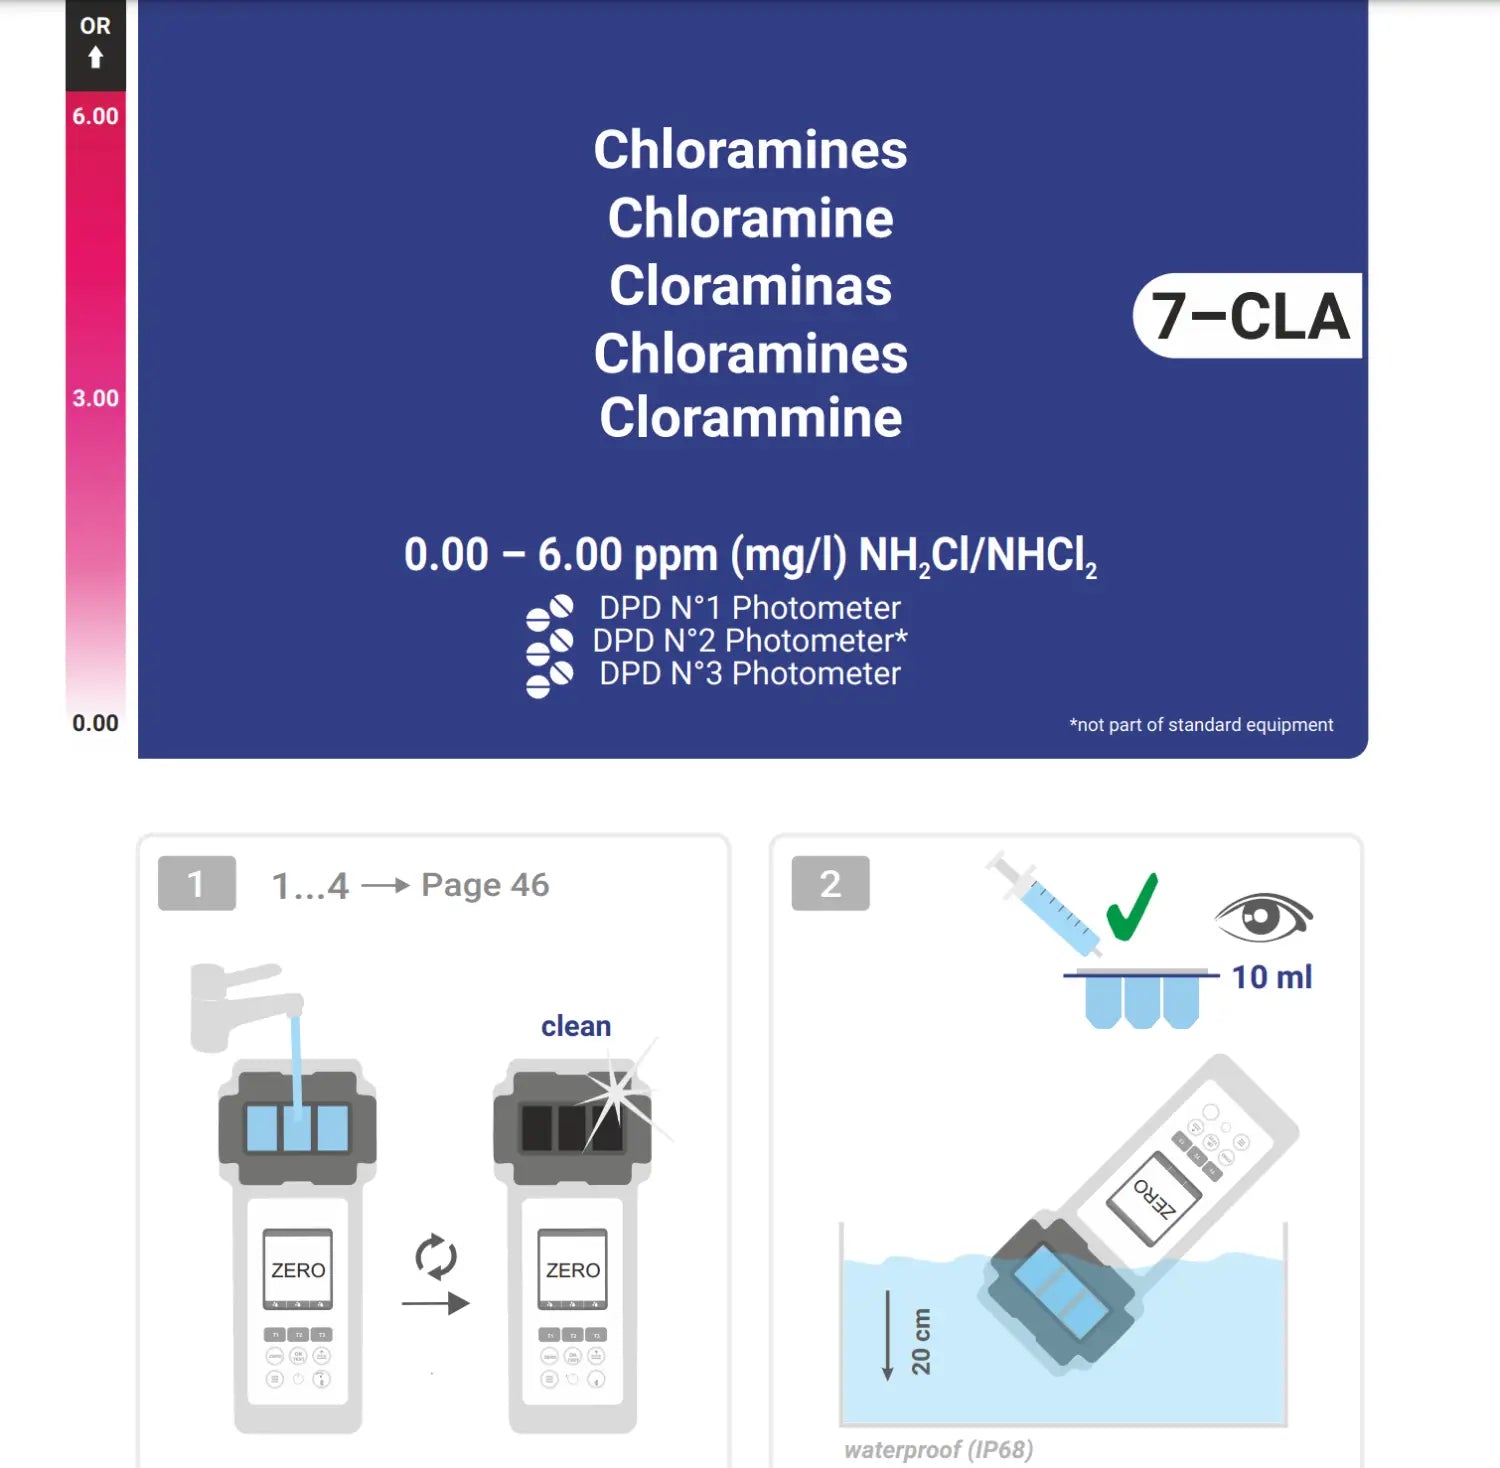 Chloramine (NH Cl/NH Cl) measurement. (CLA)